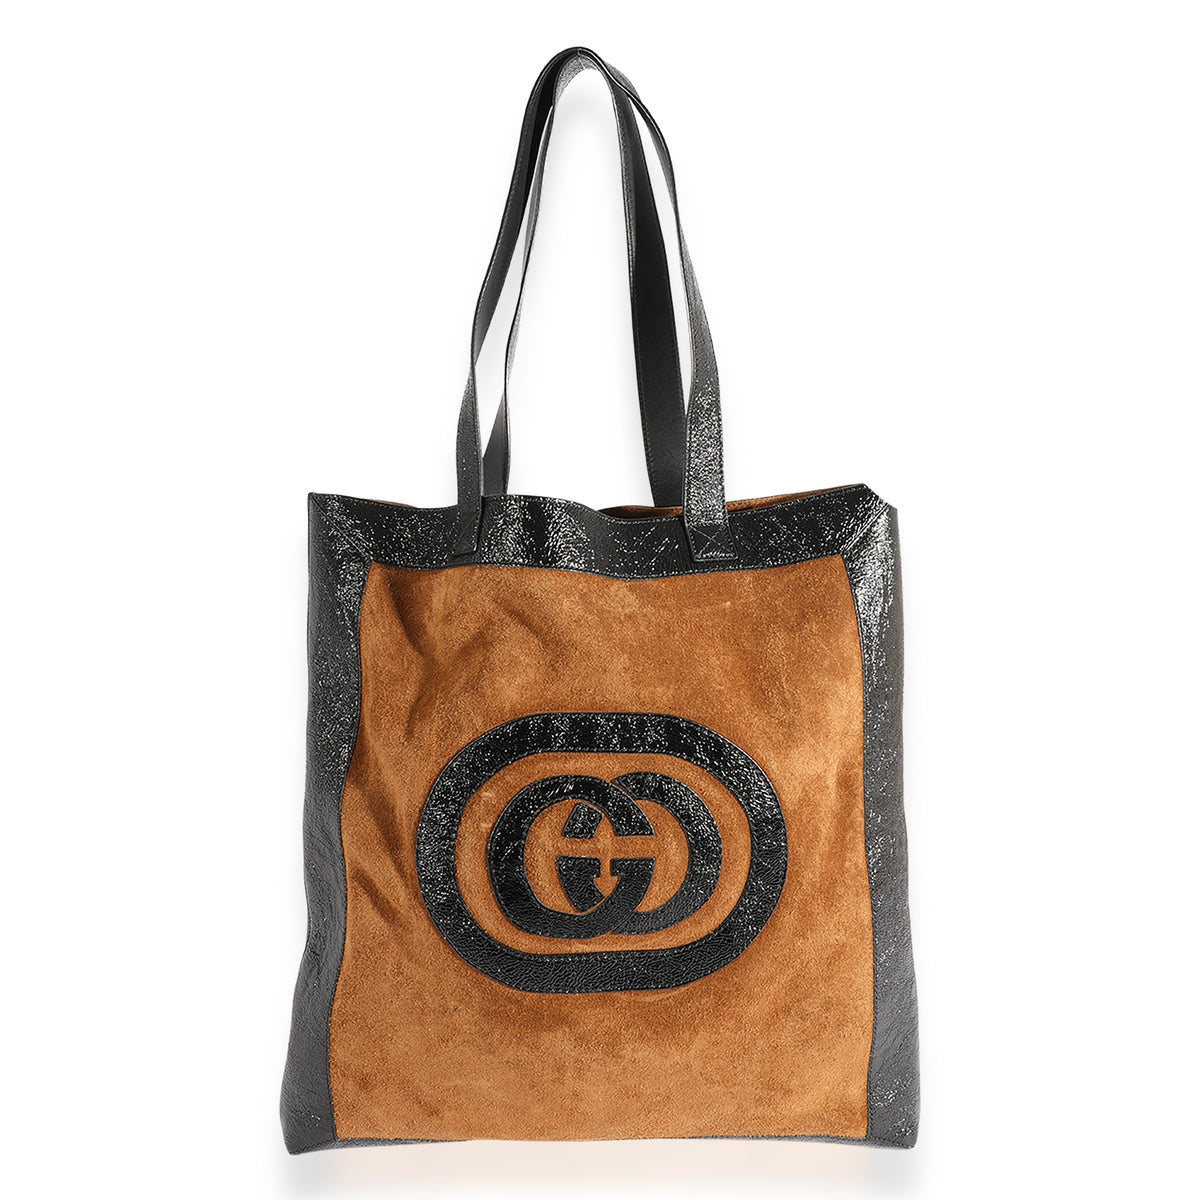 Gucci Brown Suede & Black Patent Leather Logo Tote